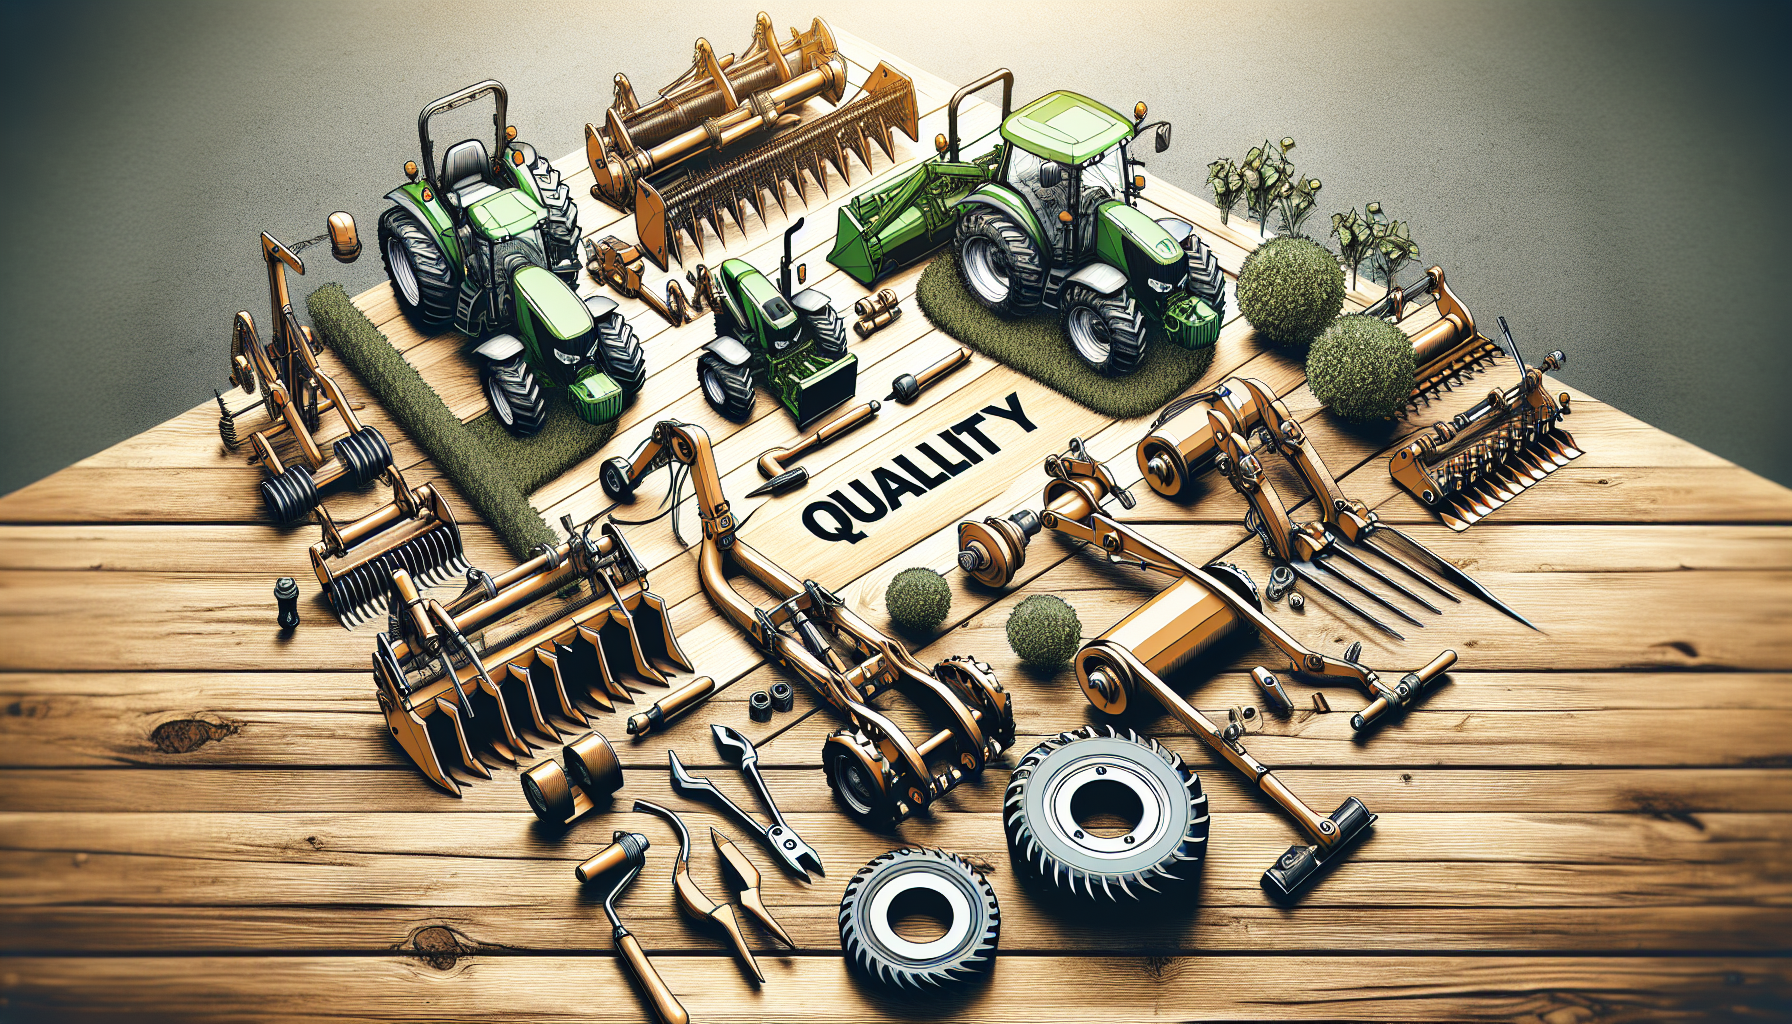 Buyers Guide: How To Find Quality Tractor Accessories